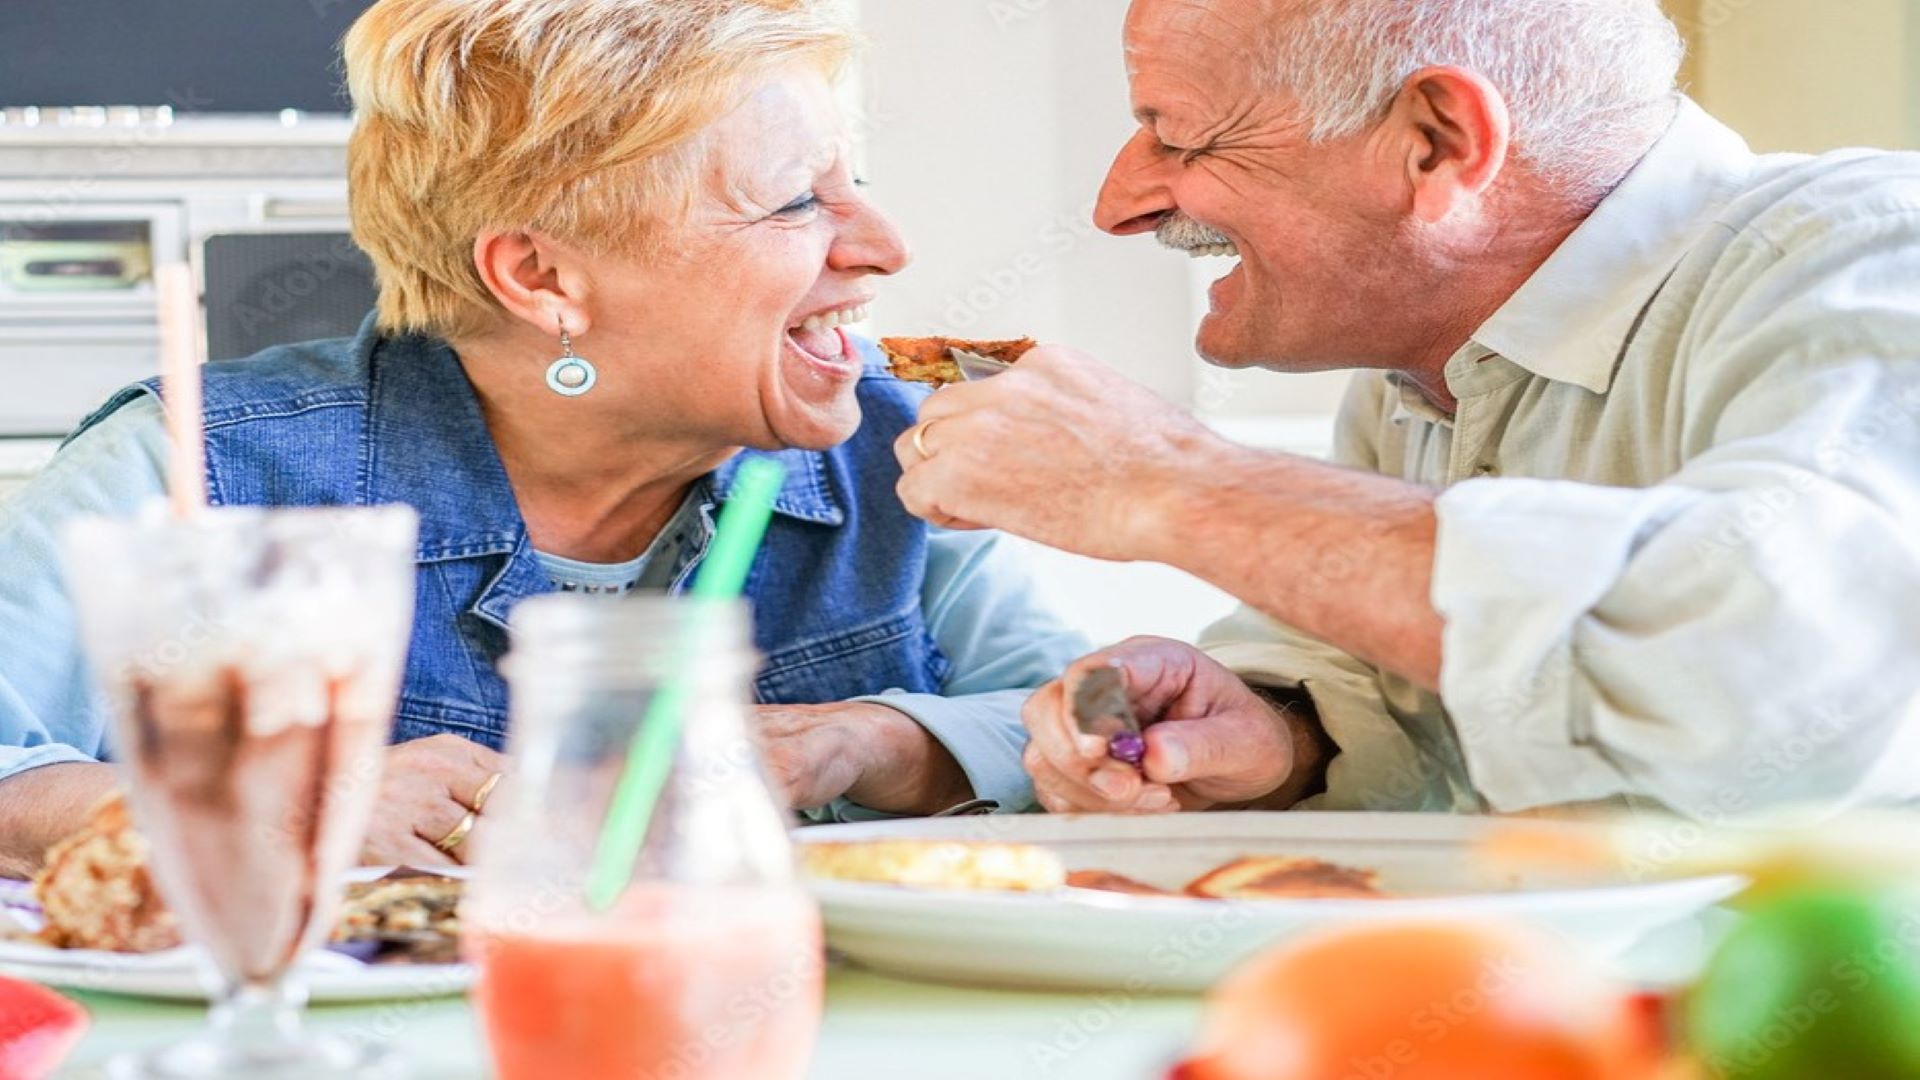 Image is of an older couple laughing and facing each other as they eat food